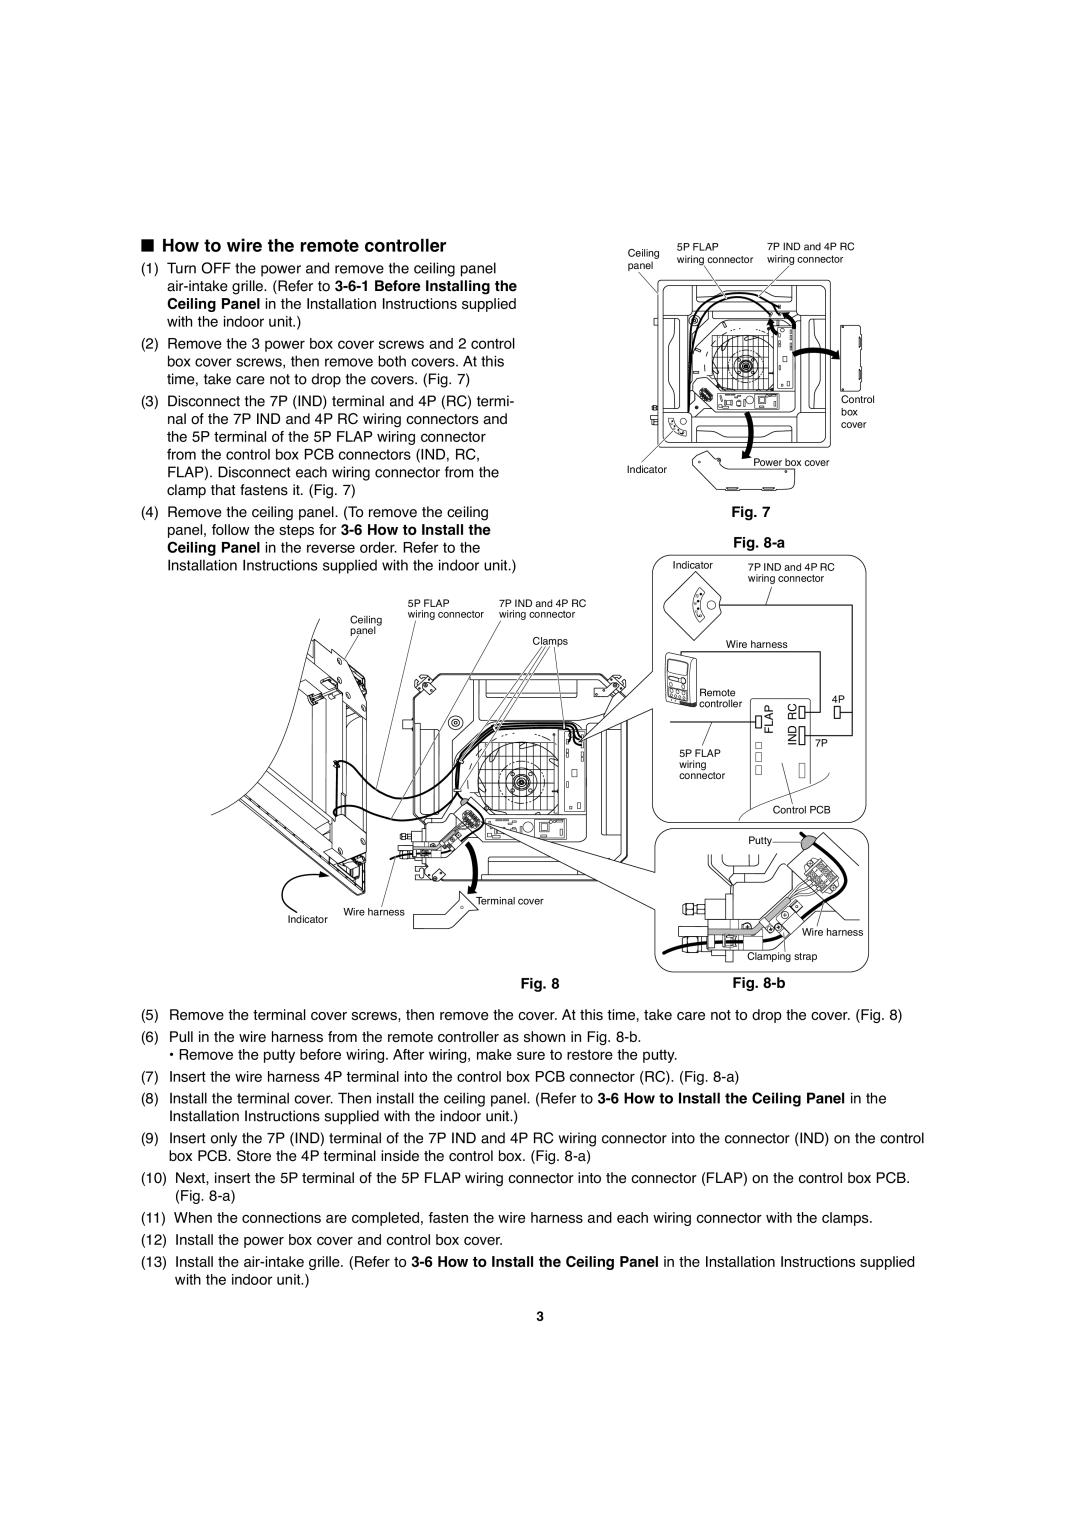 Sanyo XMHS1272, XMHS0972 service manual How to wire the remote controller, Fig, b 